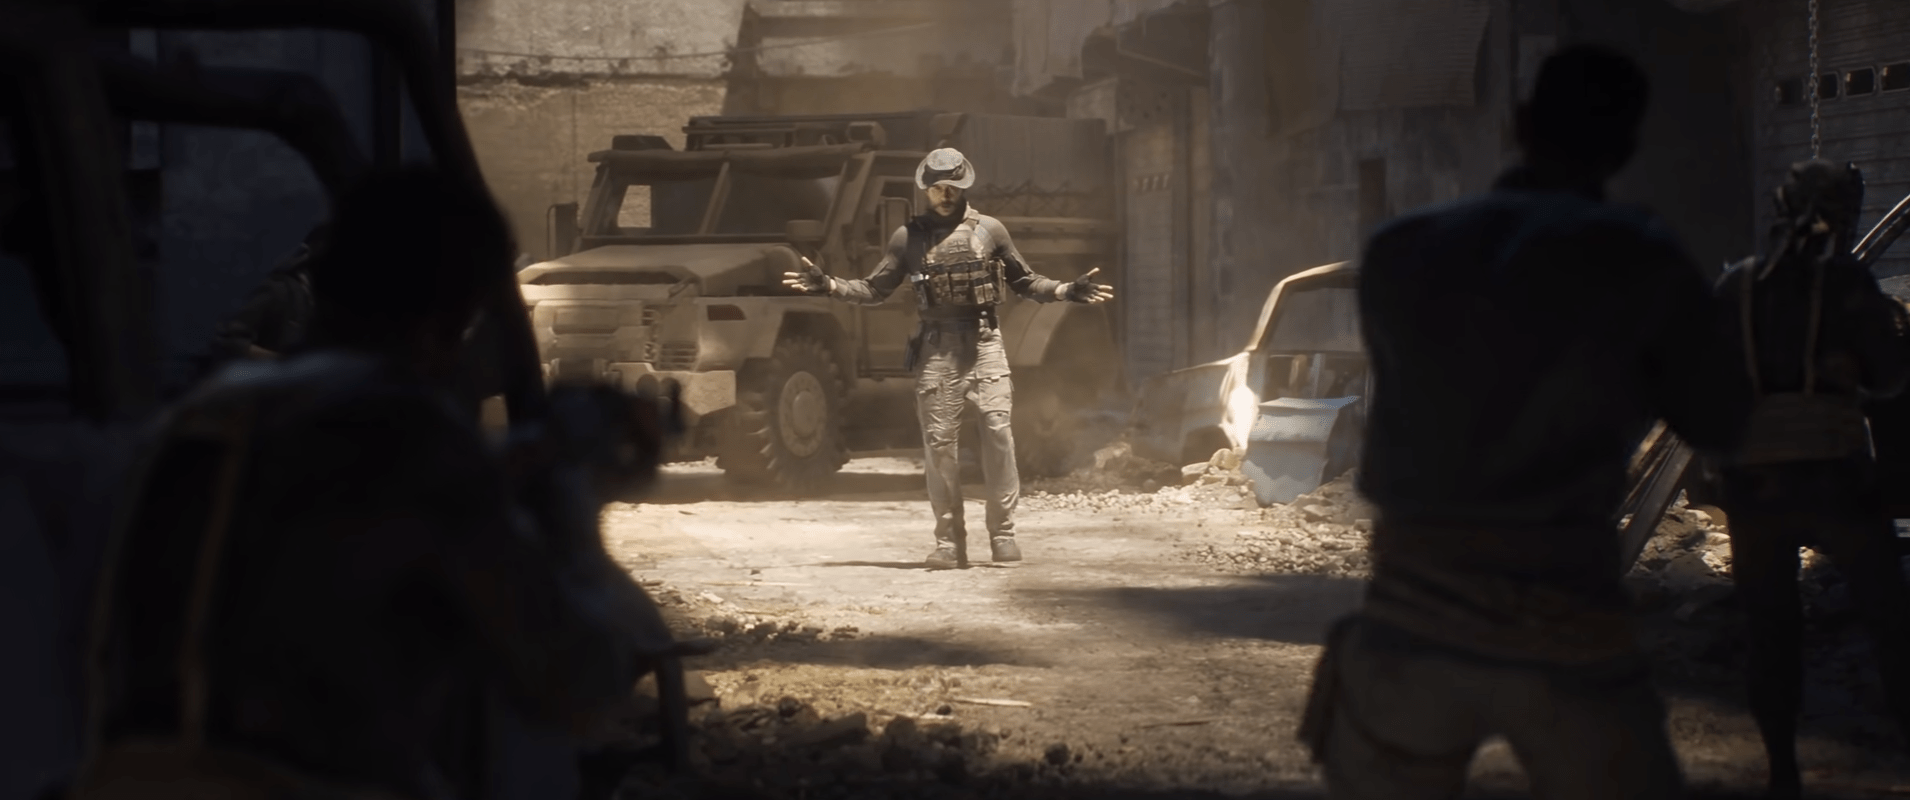 Warzone Players Can Enjoy The Main Multiplayer In Modern Warfare For Free This Weekend